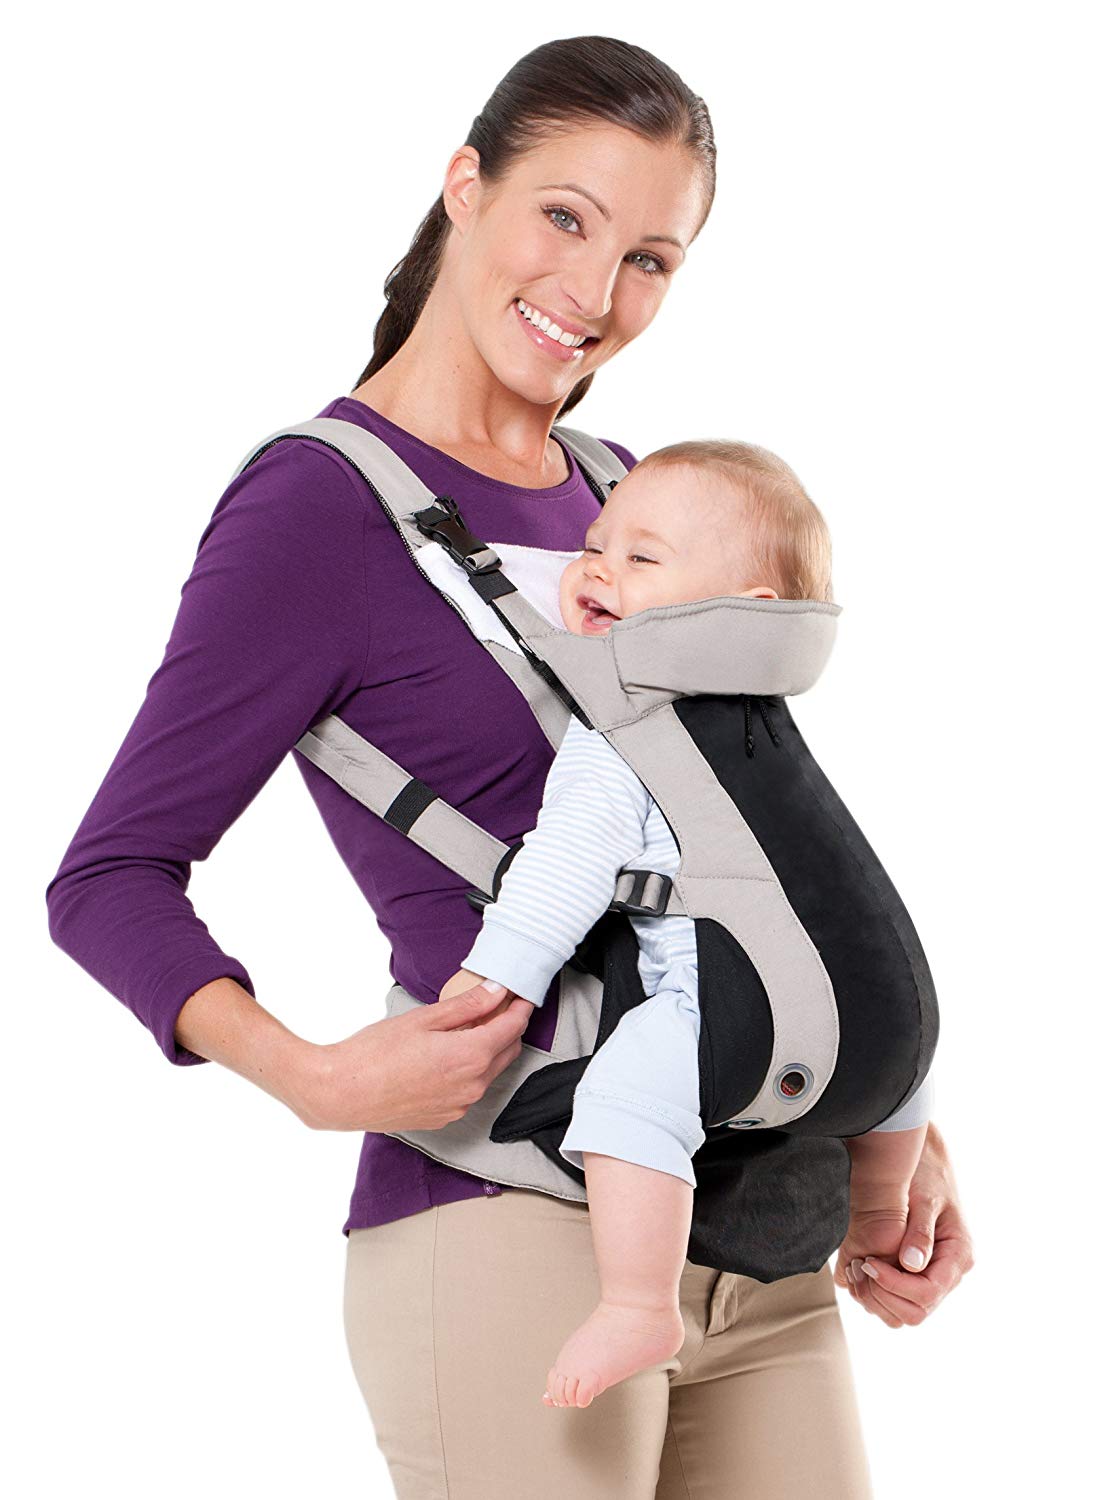 AMAZONAS Carry Star Baby Carrier 0-3 Years / up to 15 kg